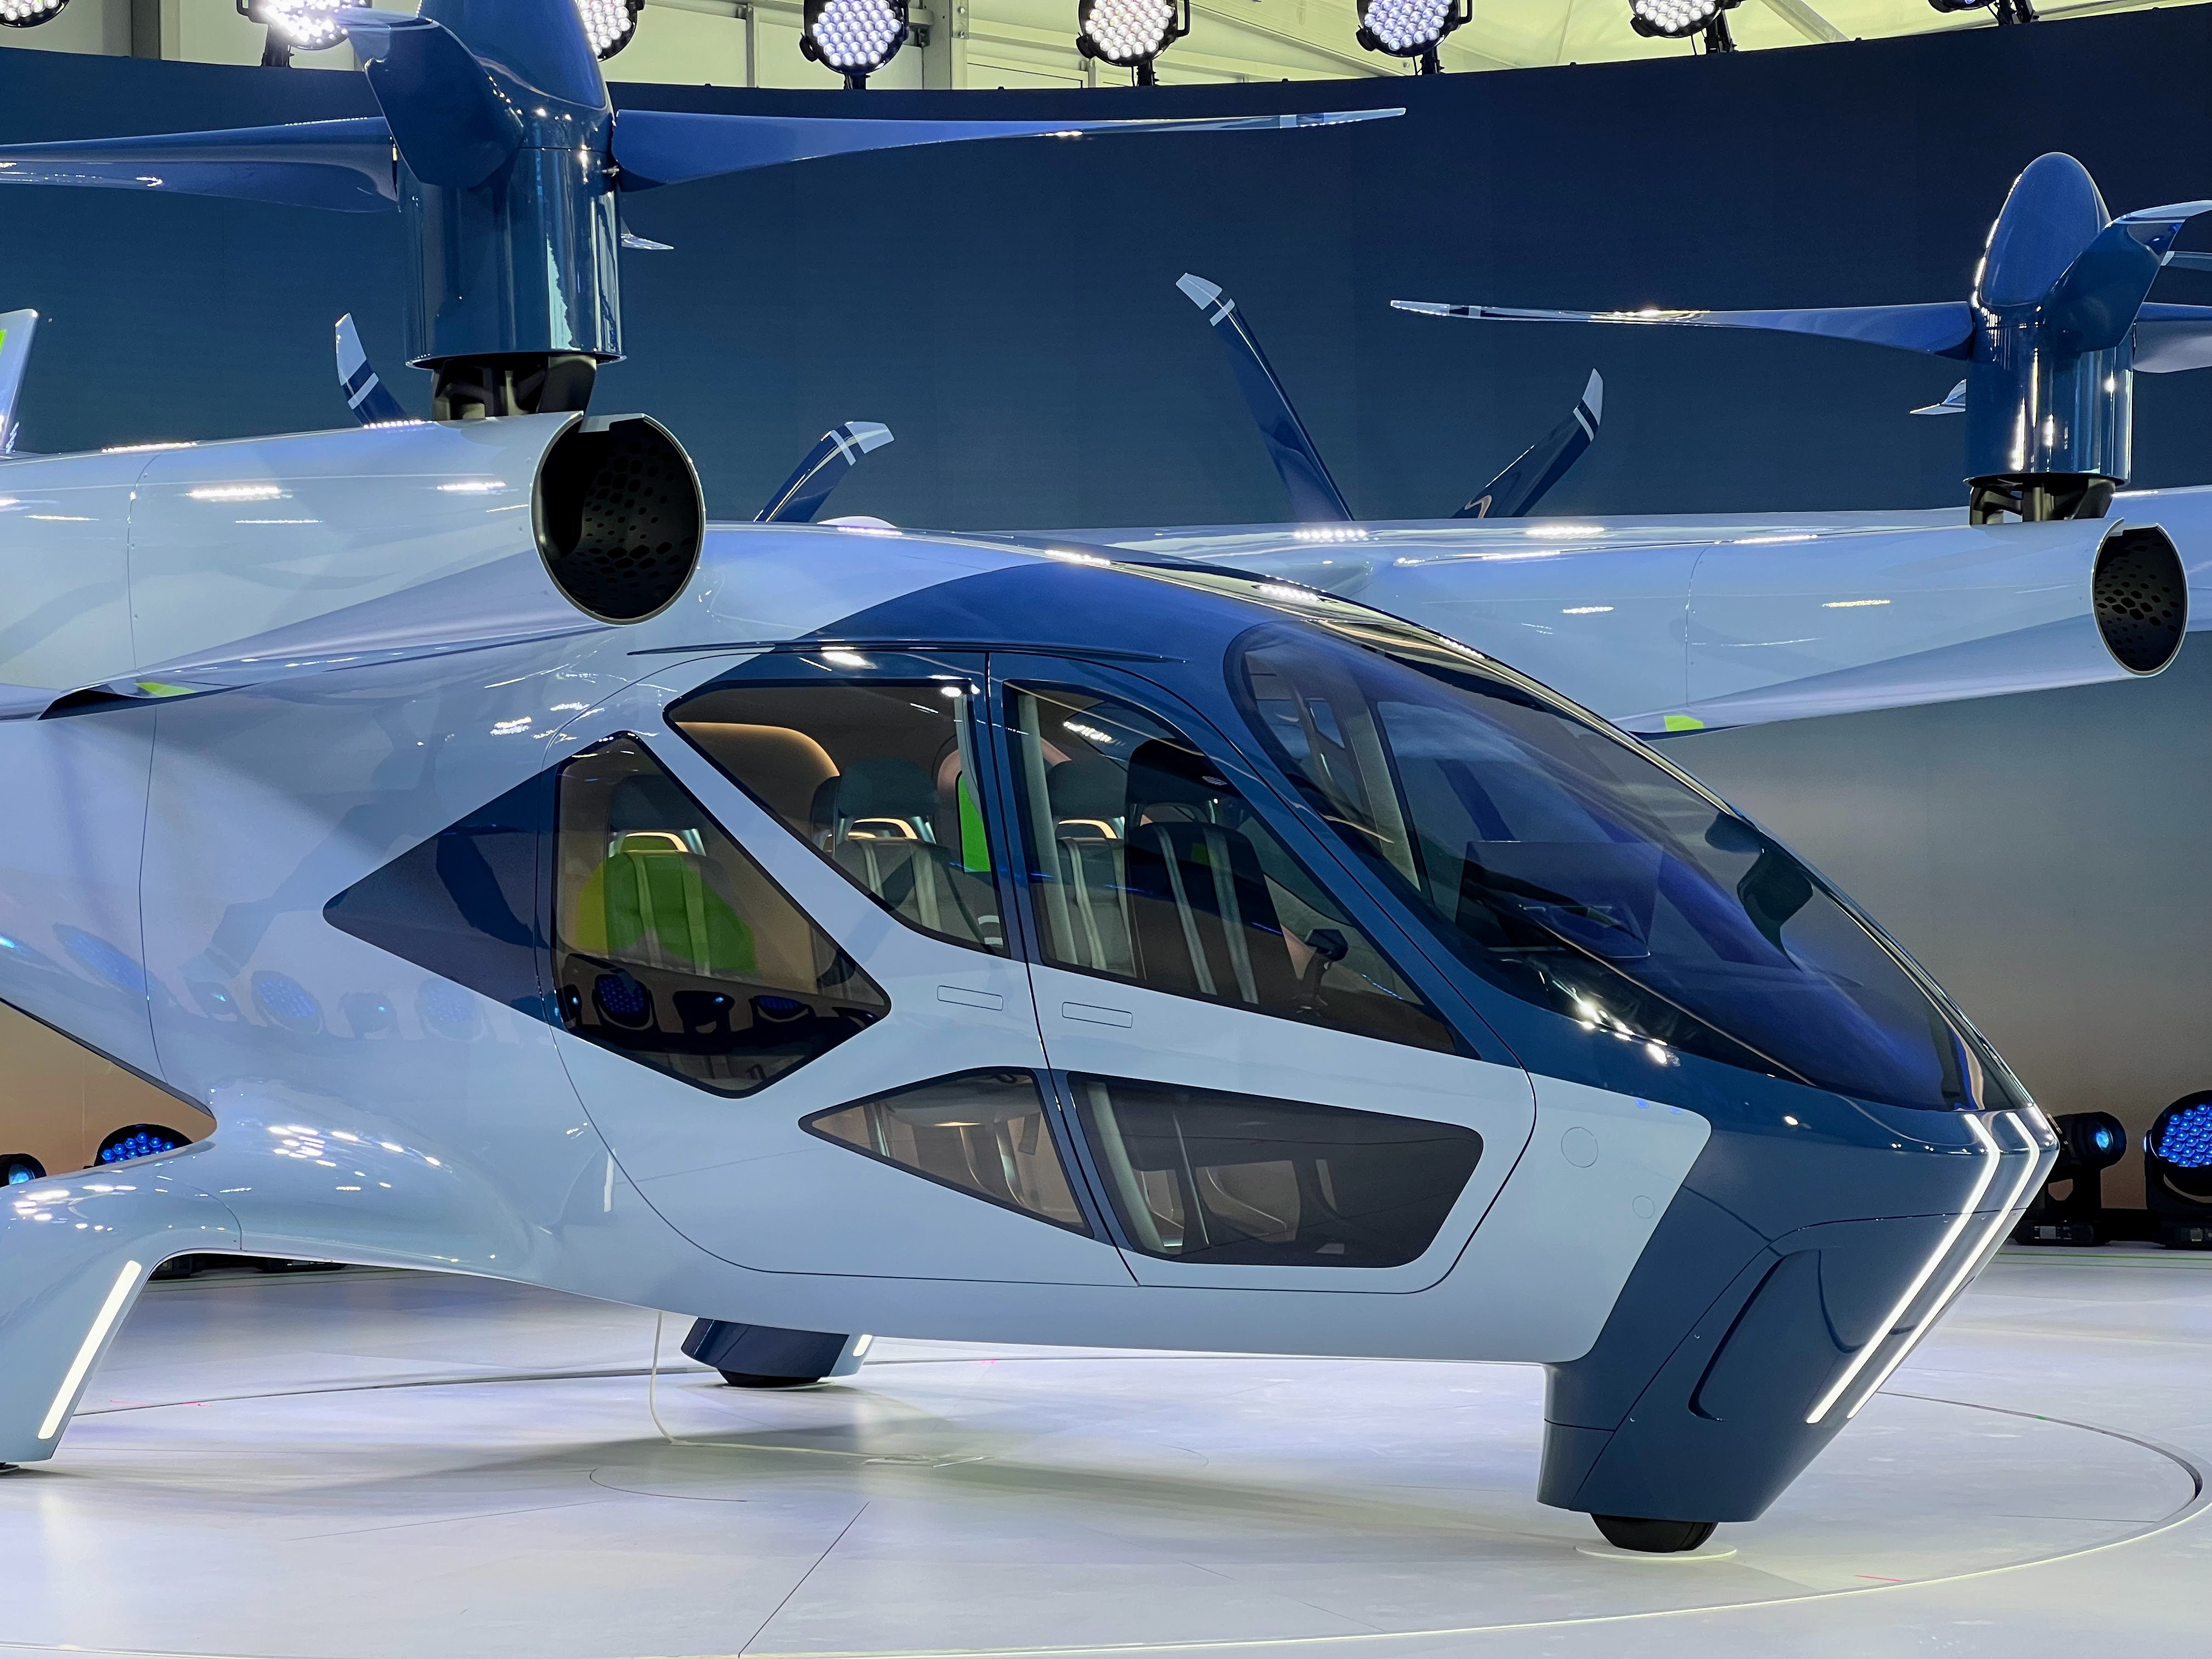 The Supernal S-A2 features a glassy cockpit and room for up to four passengers.